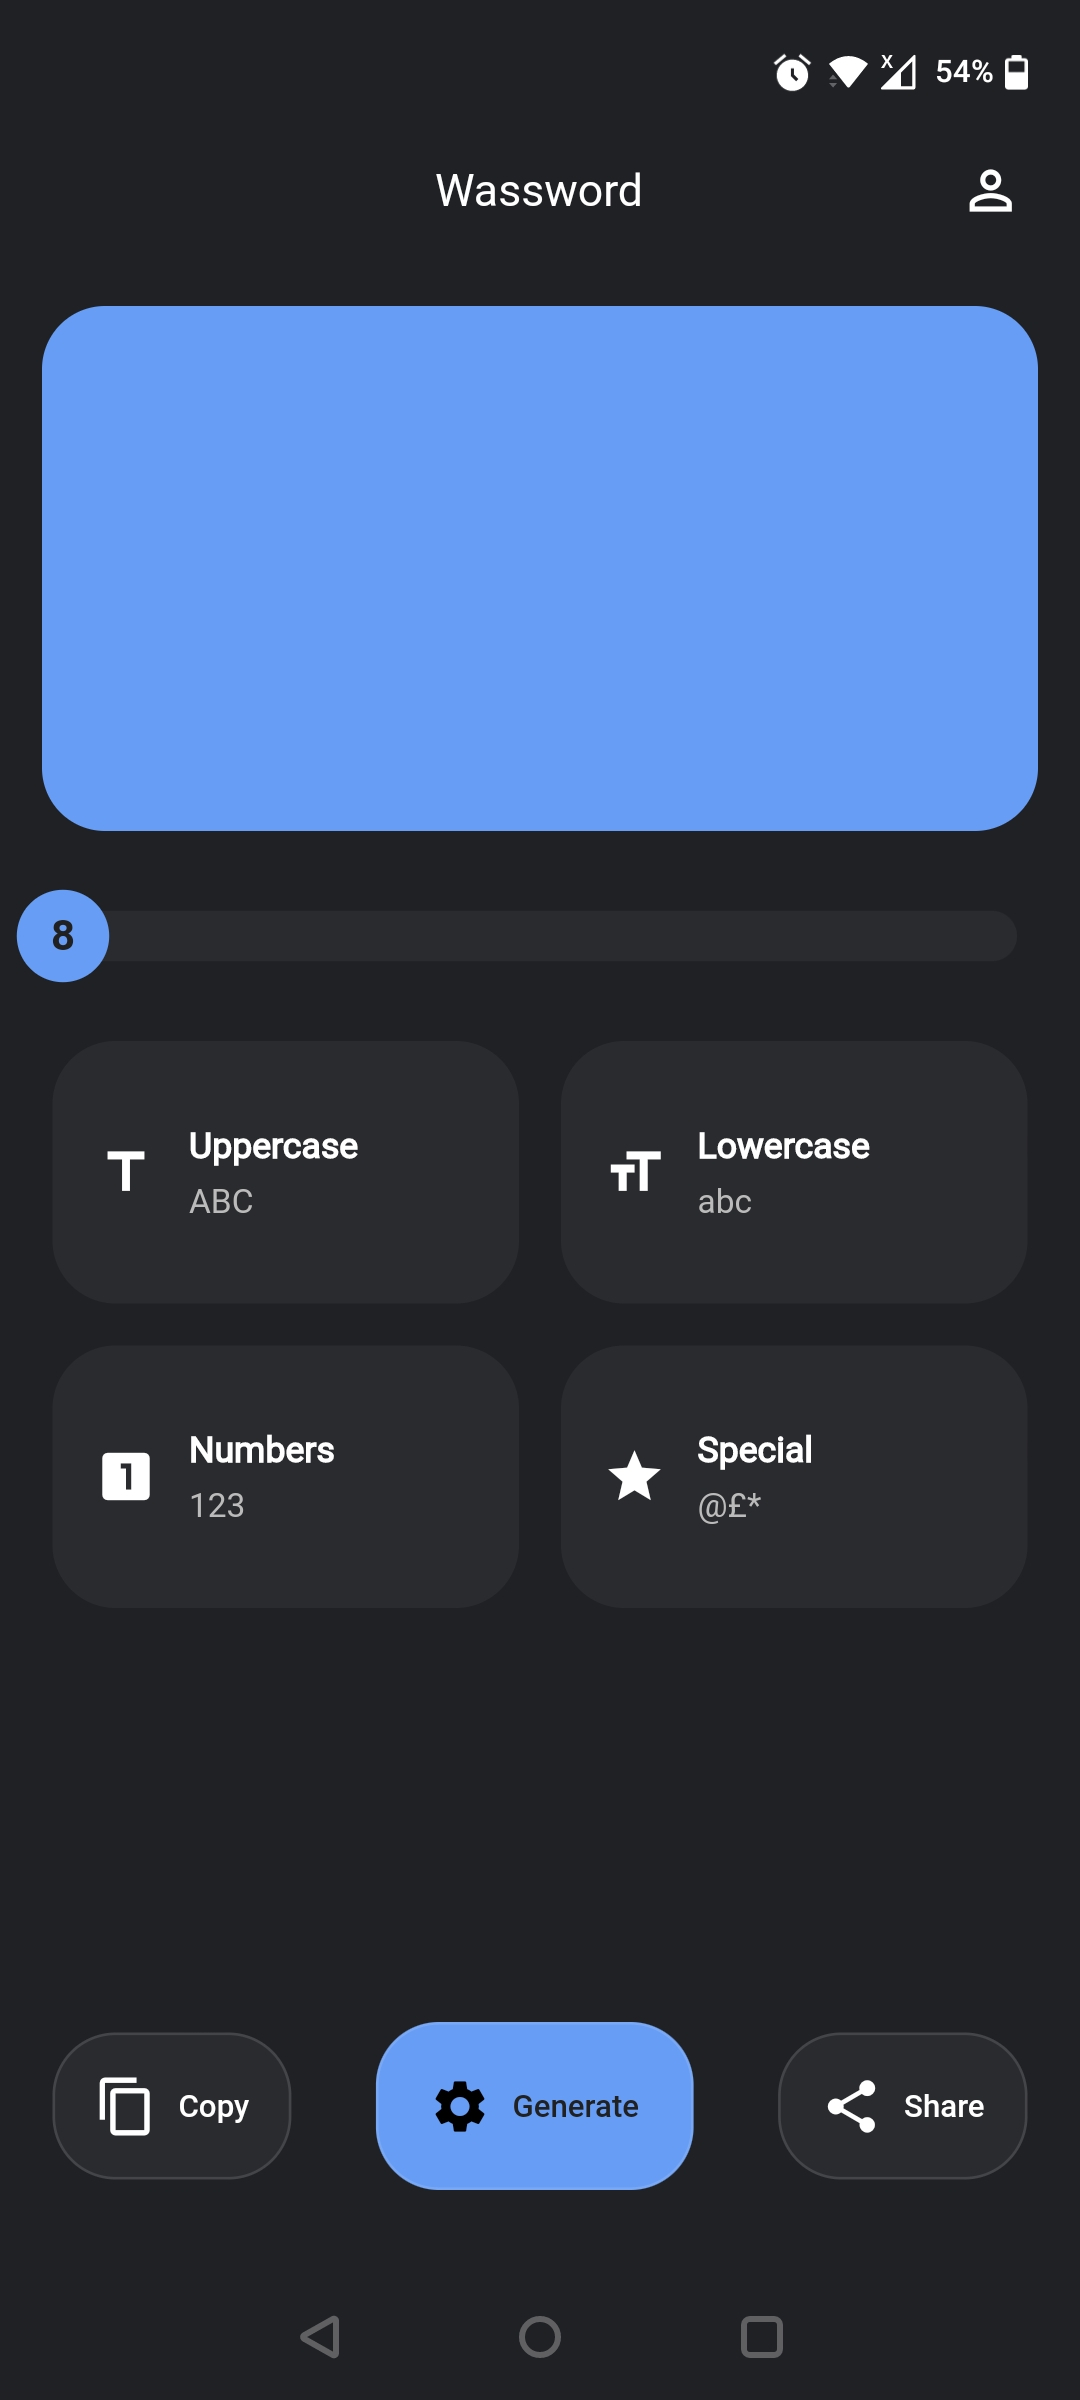 An Android App built with Flutter to generate passwords